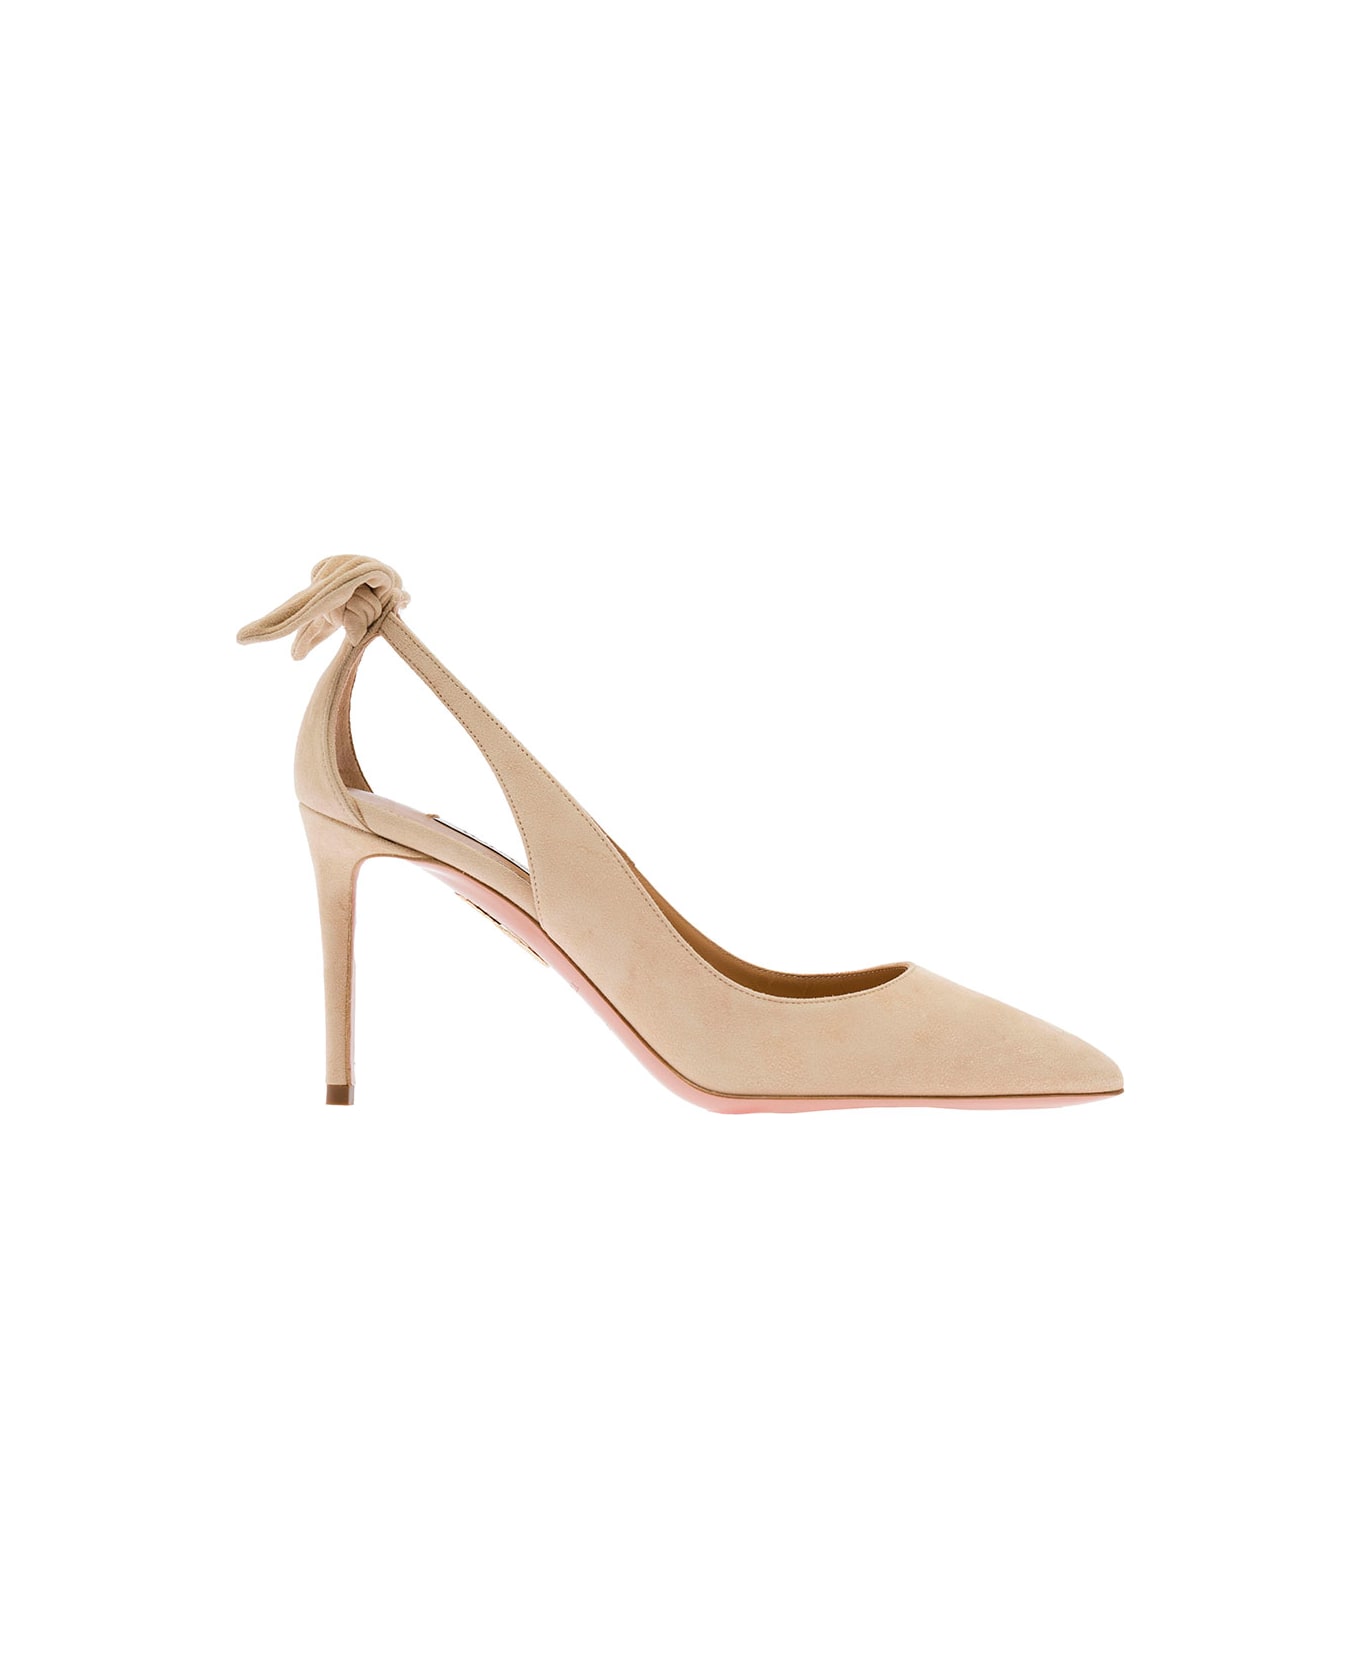 Aquazzura Pink Leather Pumps With Bow Detail - Beige ハイヒール